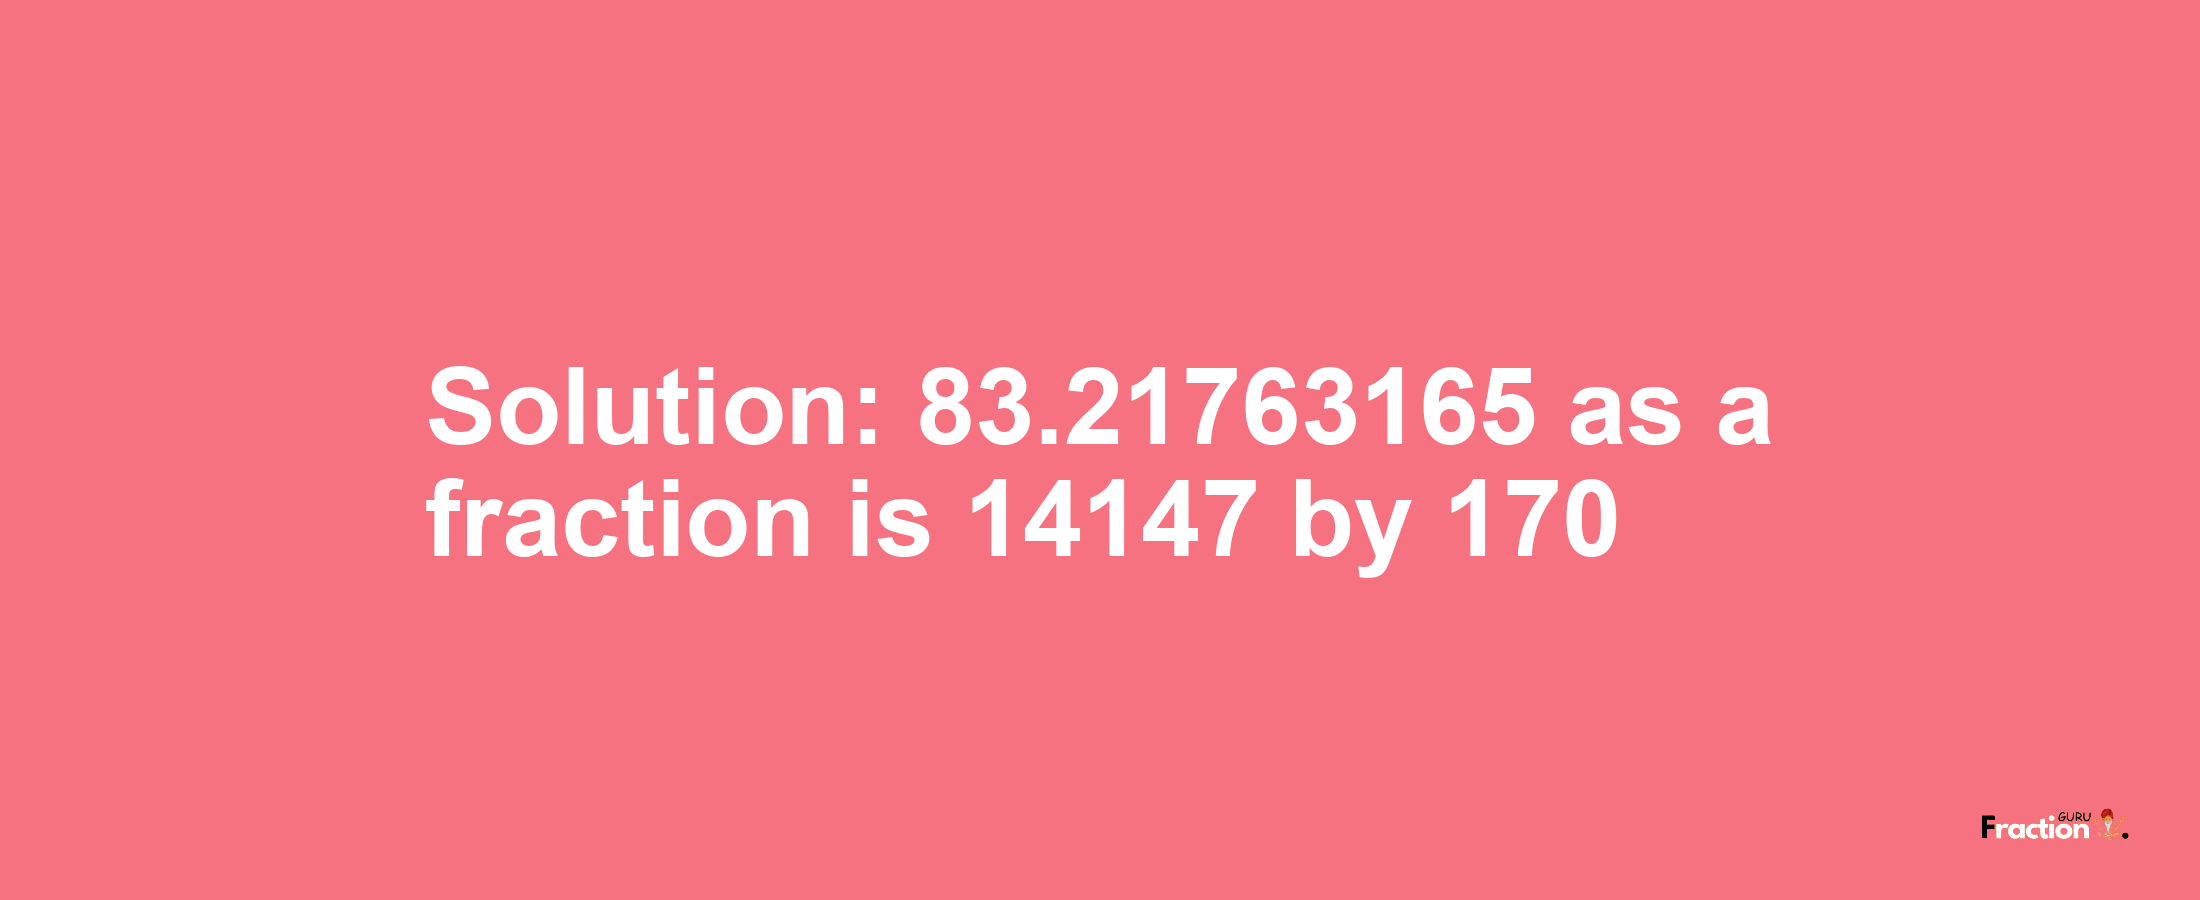 Solution:83.21763165 as a fraction is 14147/170